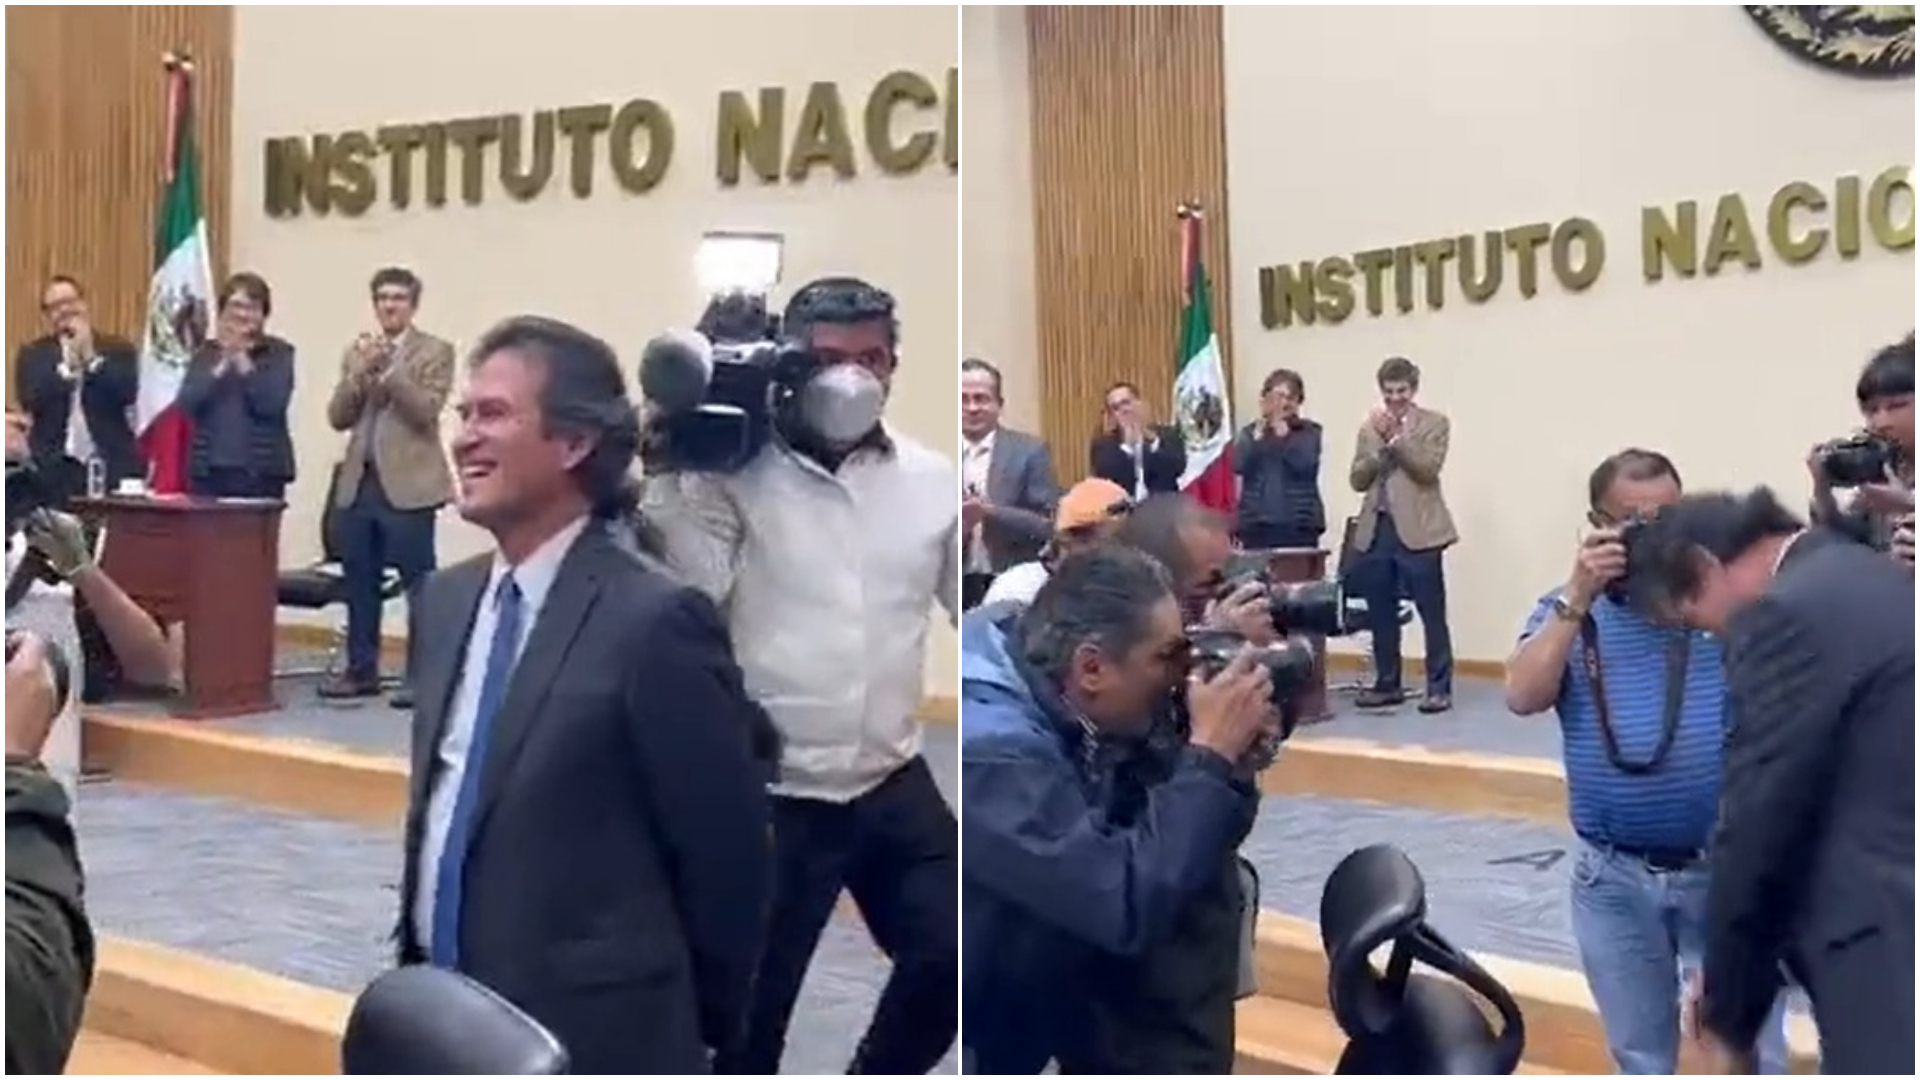 The executive secretary received an amparo to return to his position at the INE (Screenshots/Twitter/Jannet López Ponce)